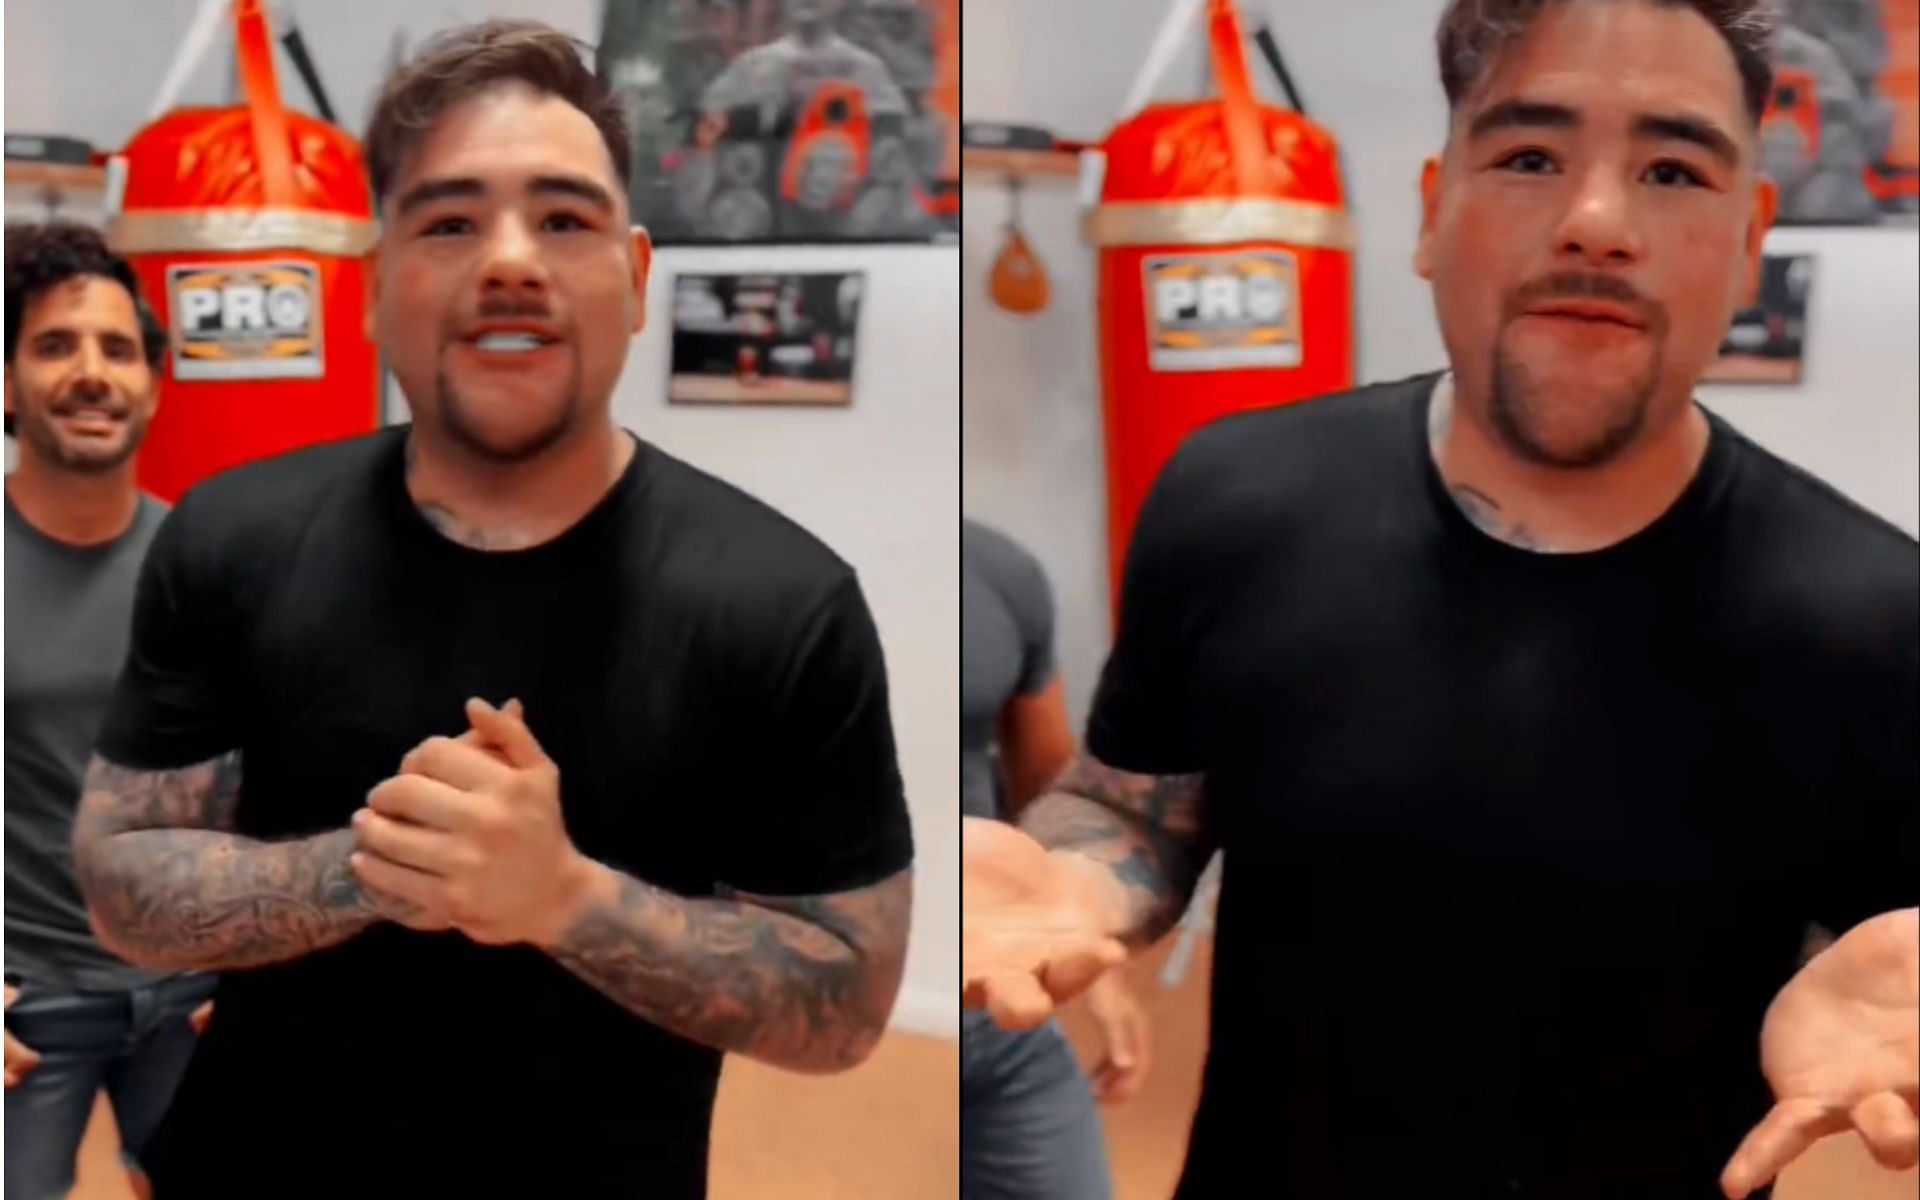 [Images from @Andy_destroyer1 on X/Twitter].